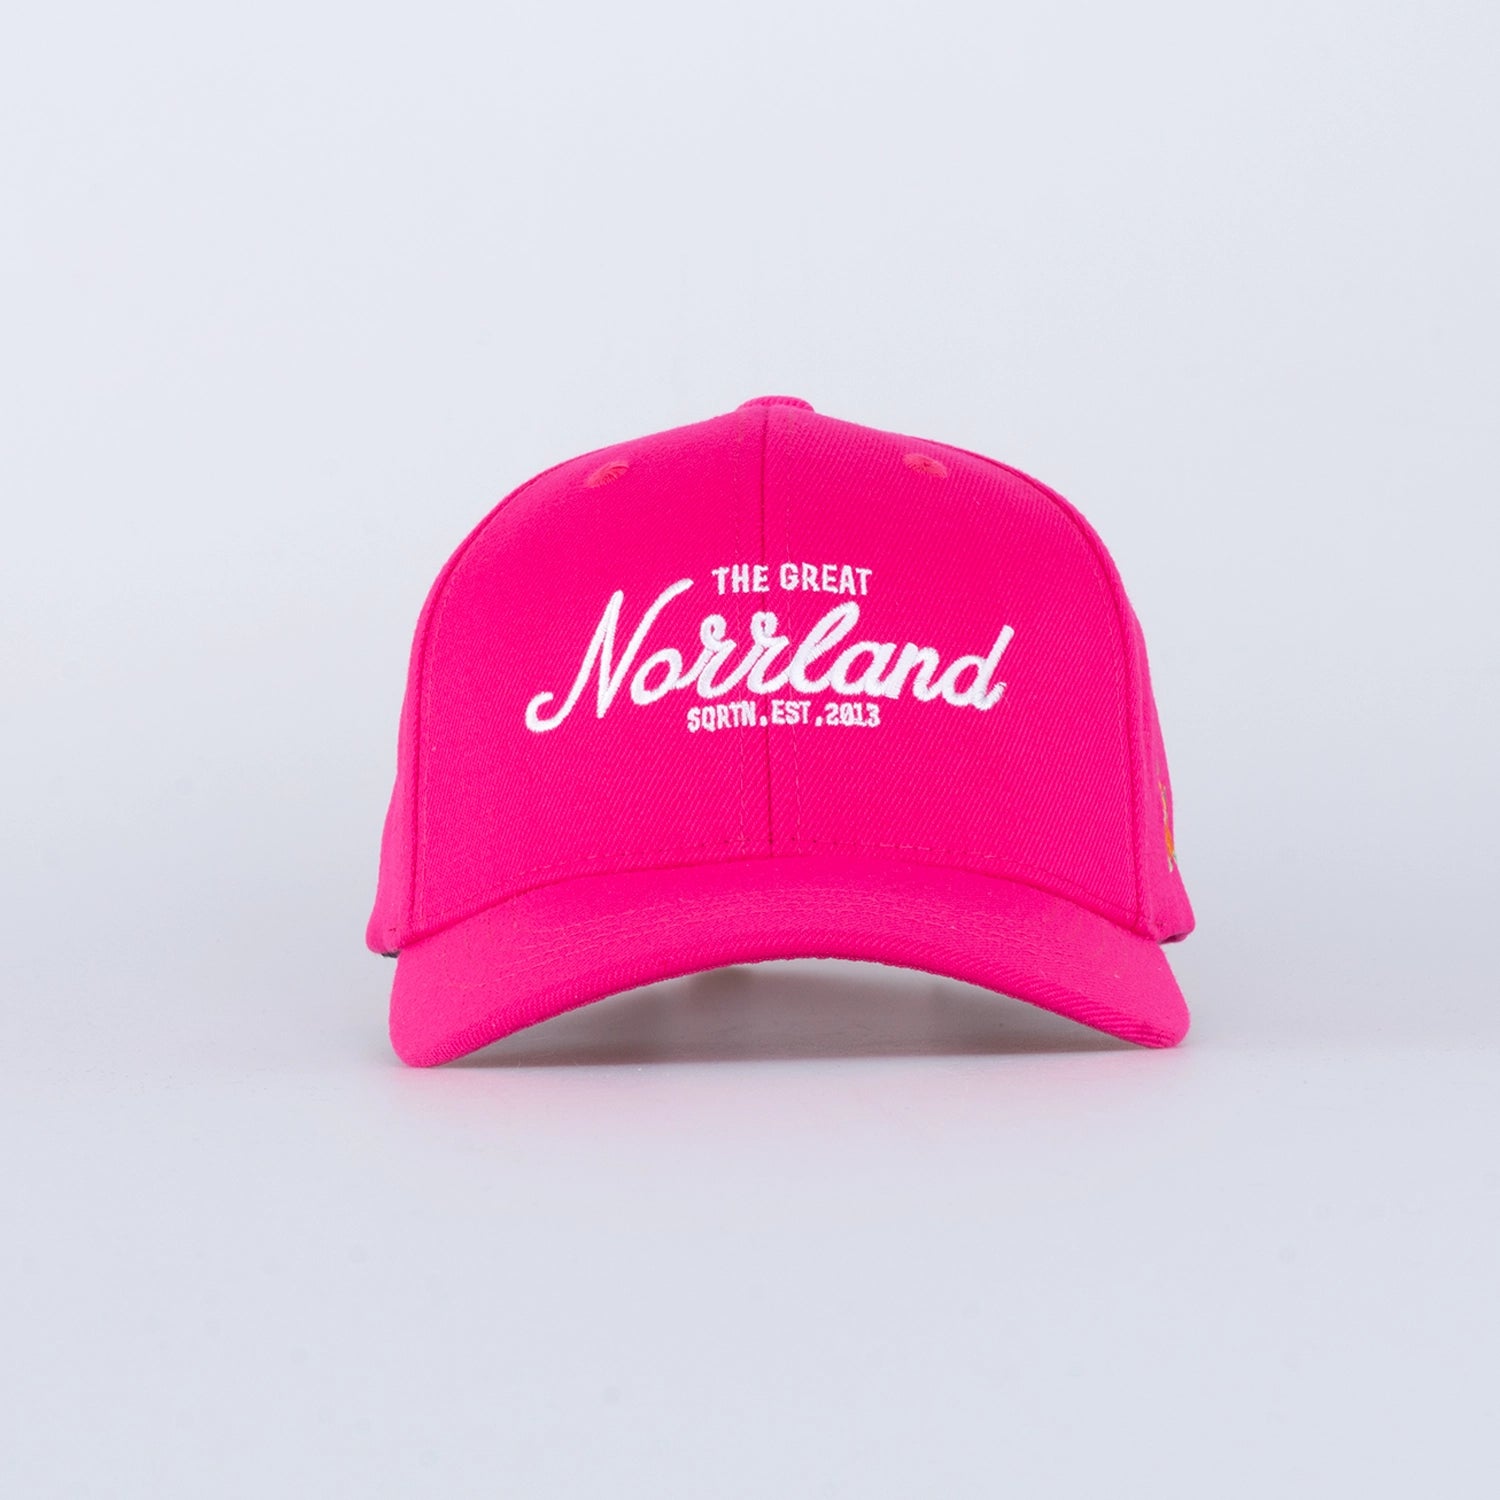 GREAT NORRLAND KIDS KEPS - HOOKED HOT PINK